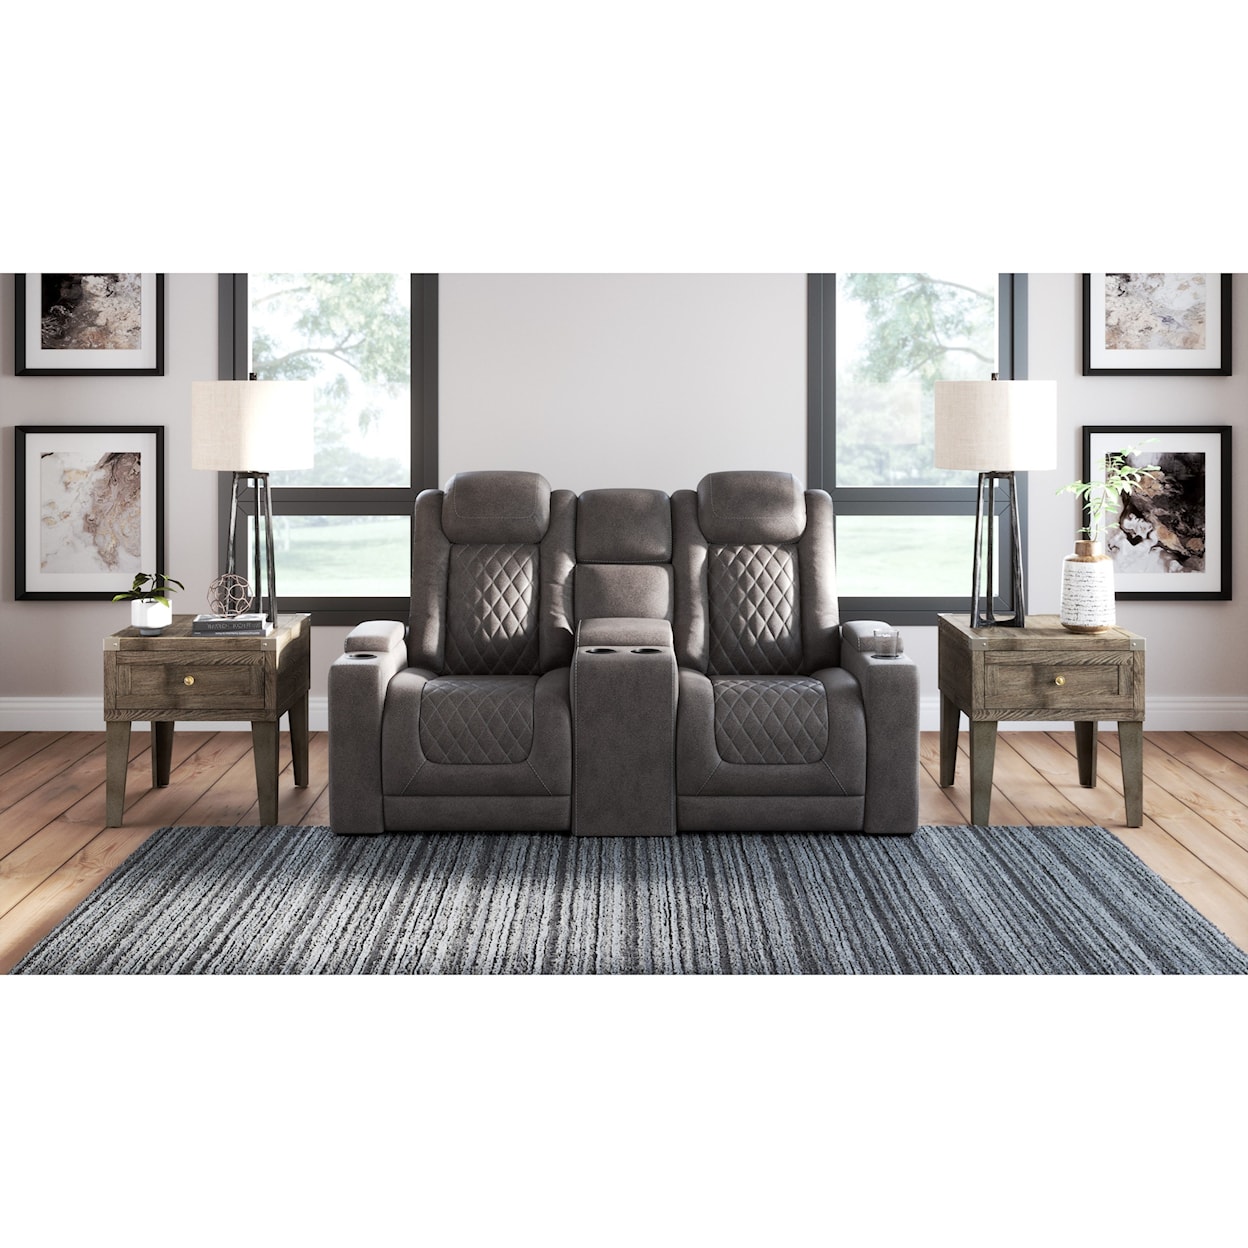 Signature Design by Ashley Hyllmont Pwr Rec Loveseat with Console and Adj Hdrsts